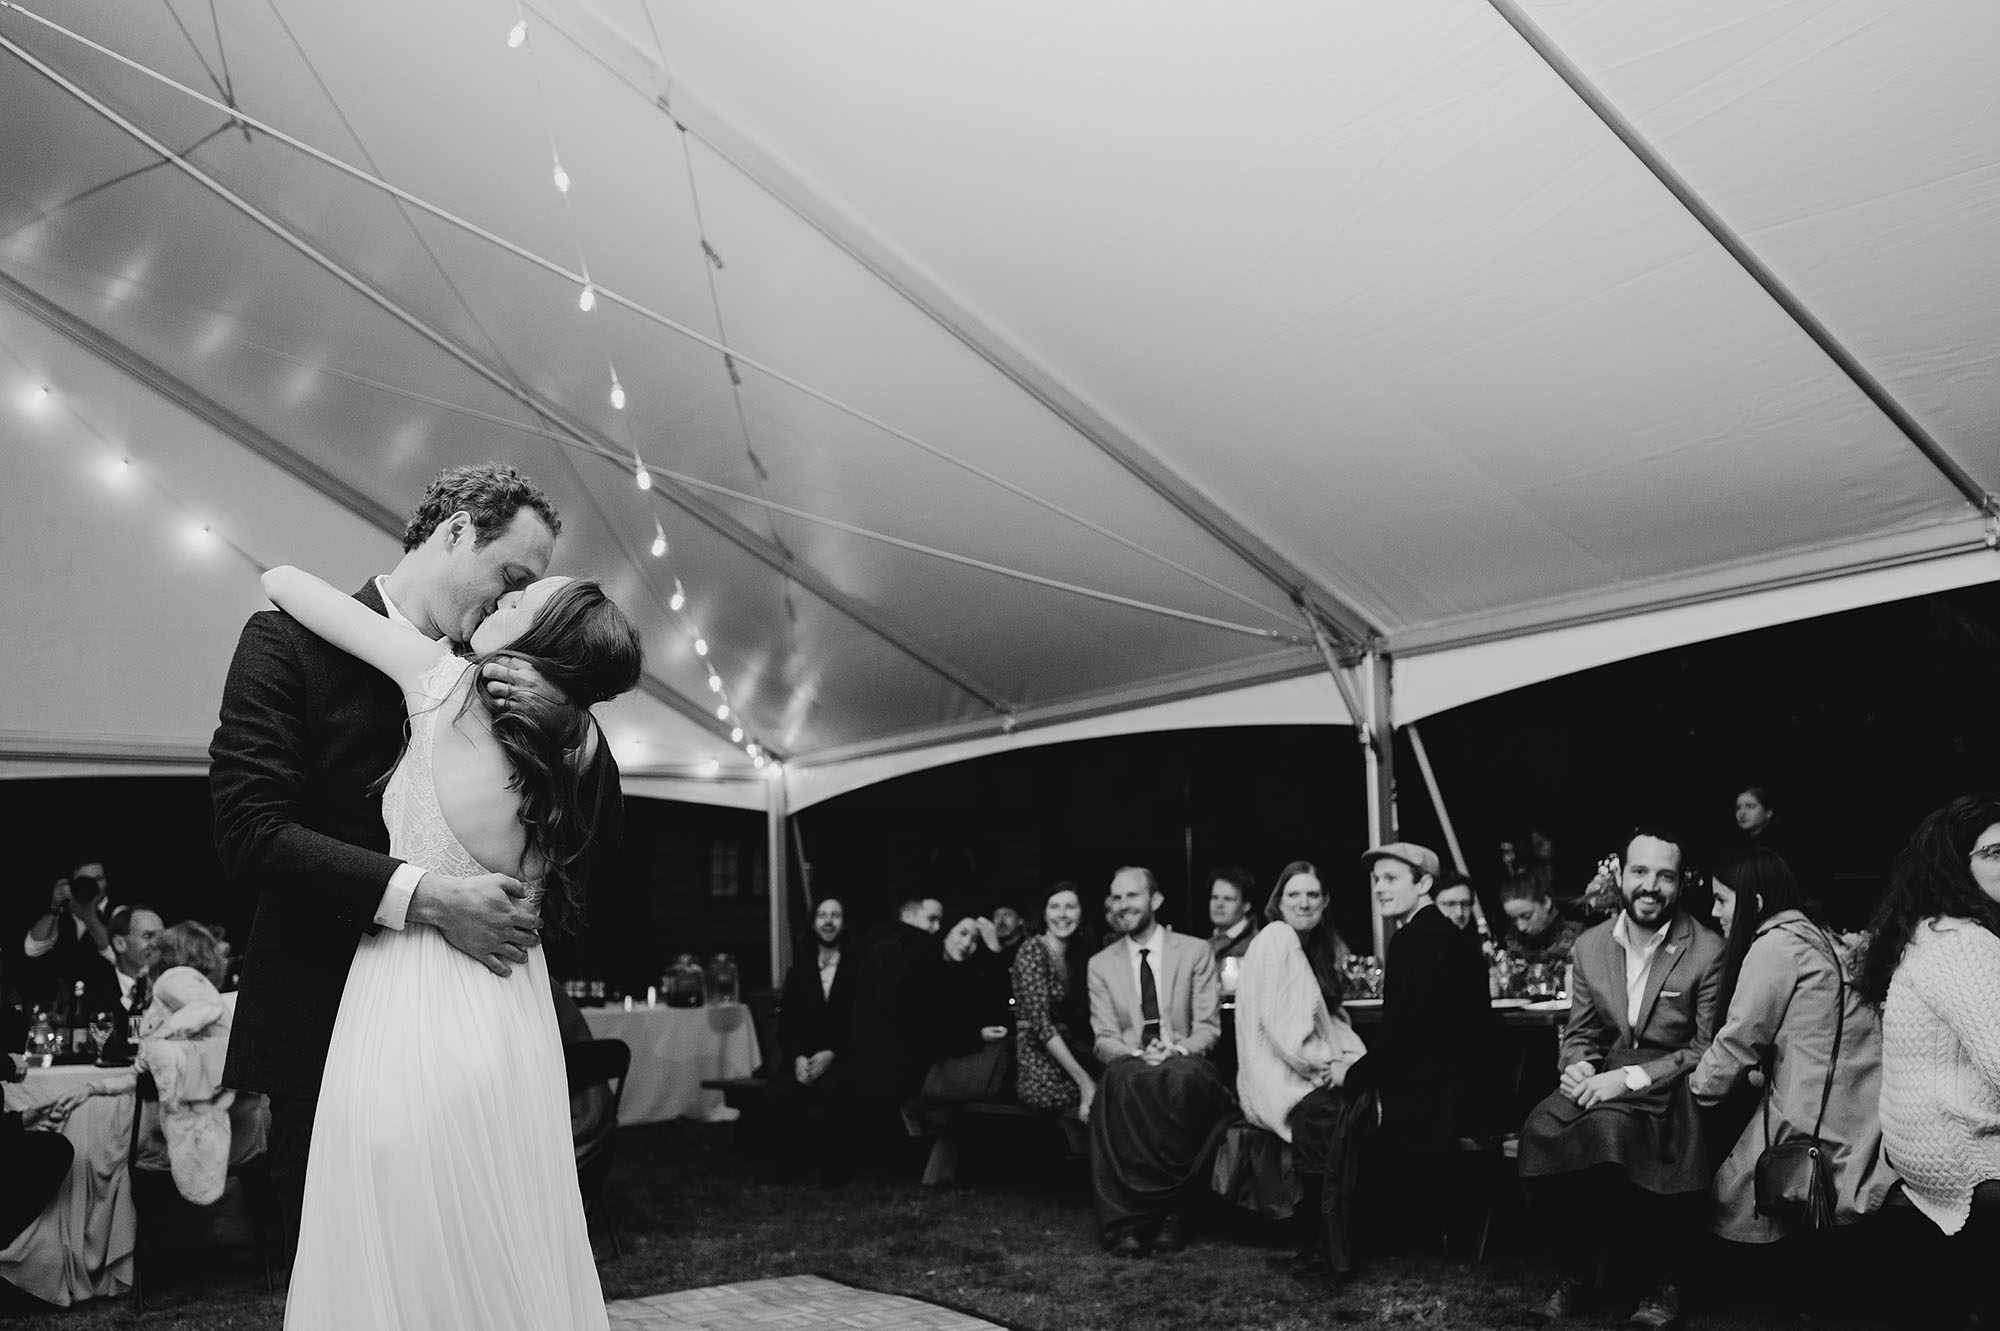 Long Beach Peninsula Wedding Black & White Portrait of First Dance by Briana Morrison Photography